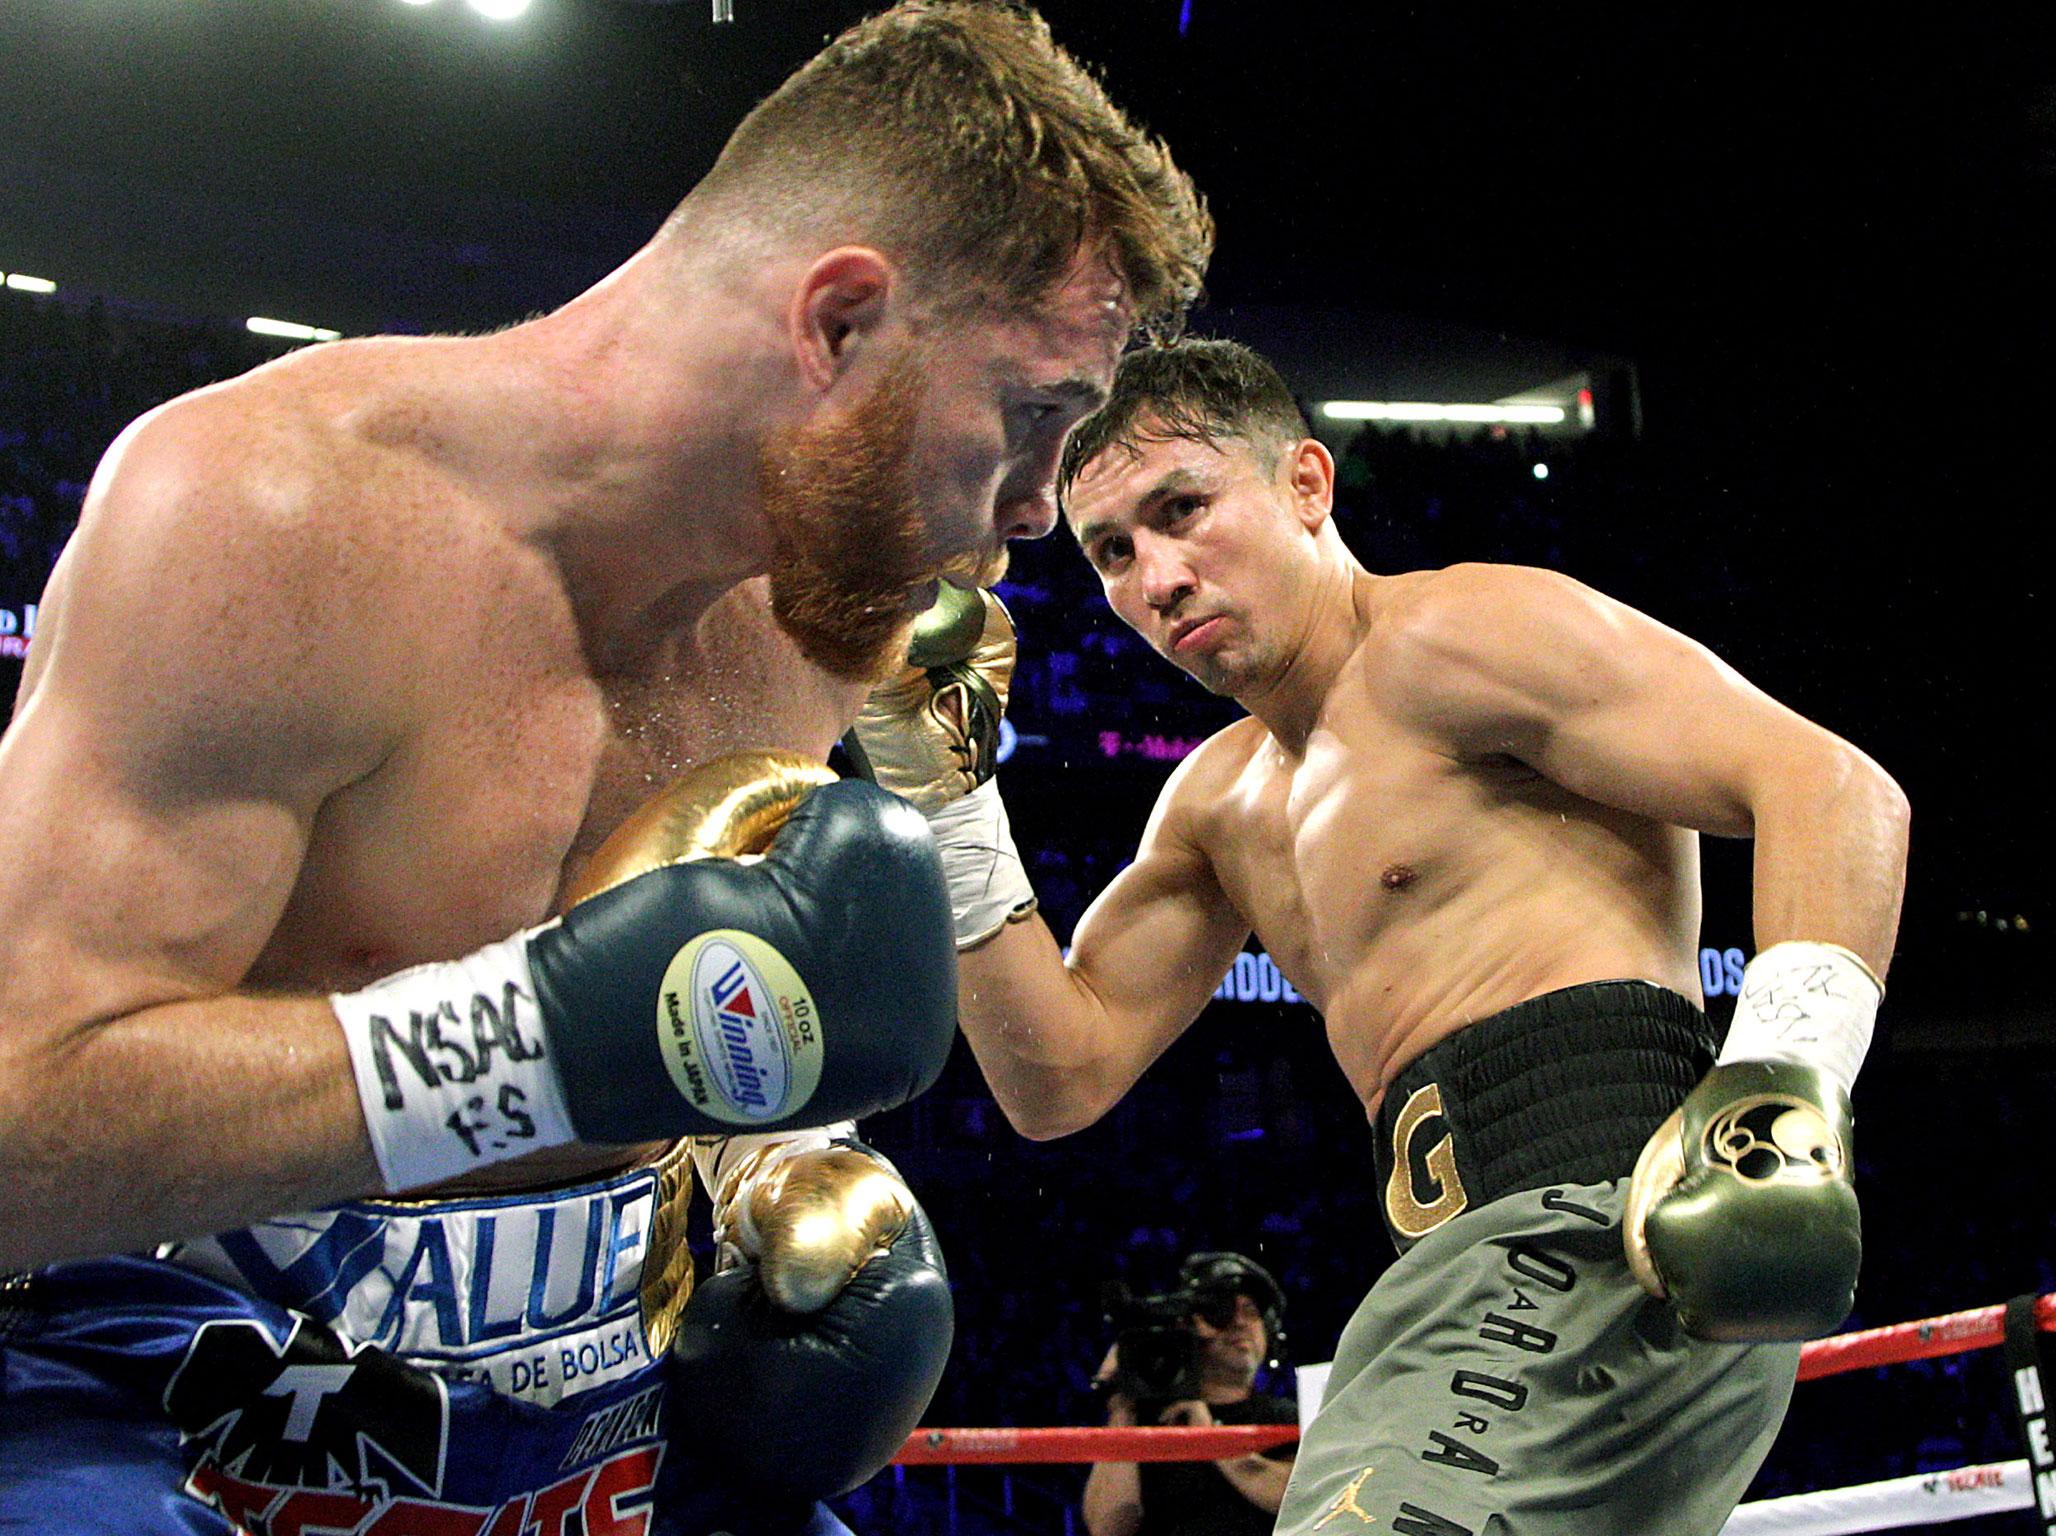 The Canelo Alvarez and Gennady Golovkin fight showed the good and bad sides of boxing